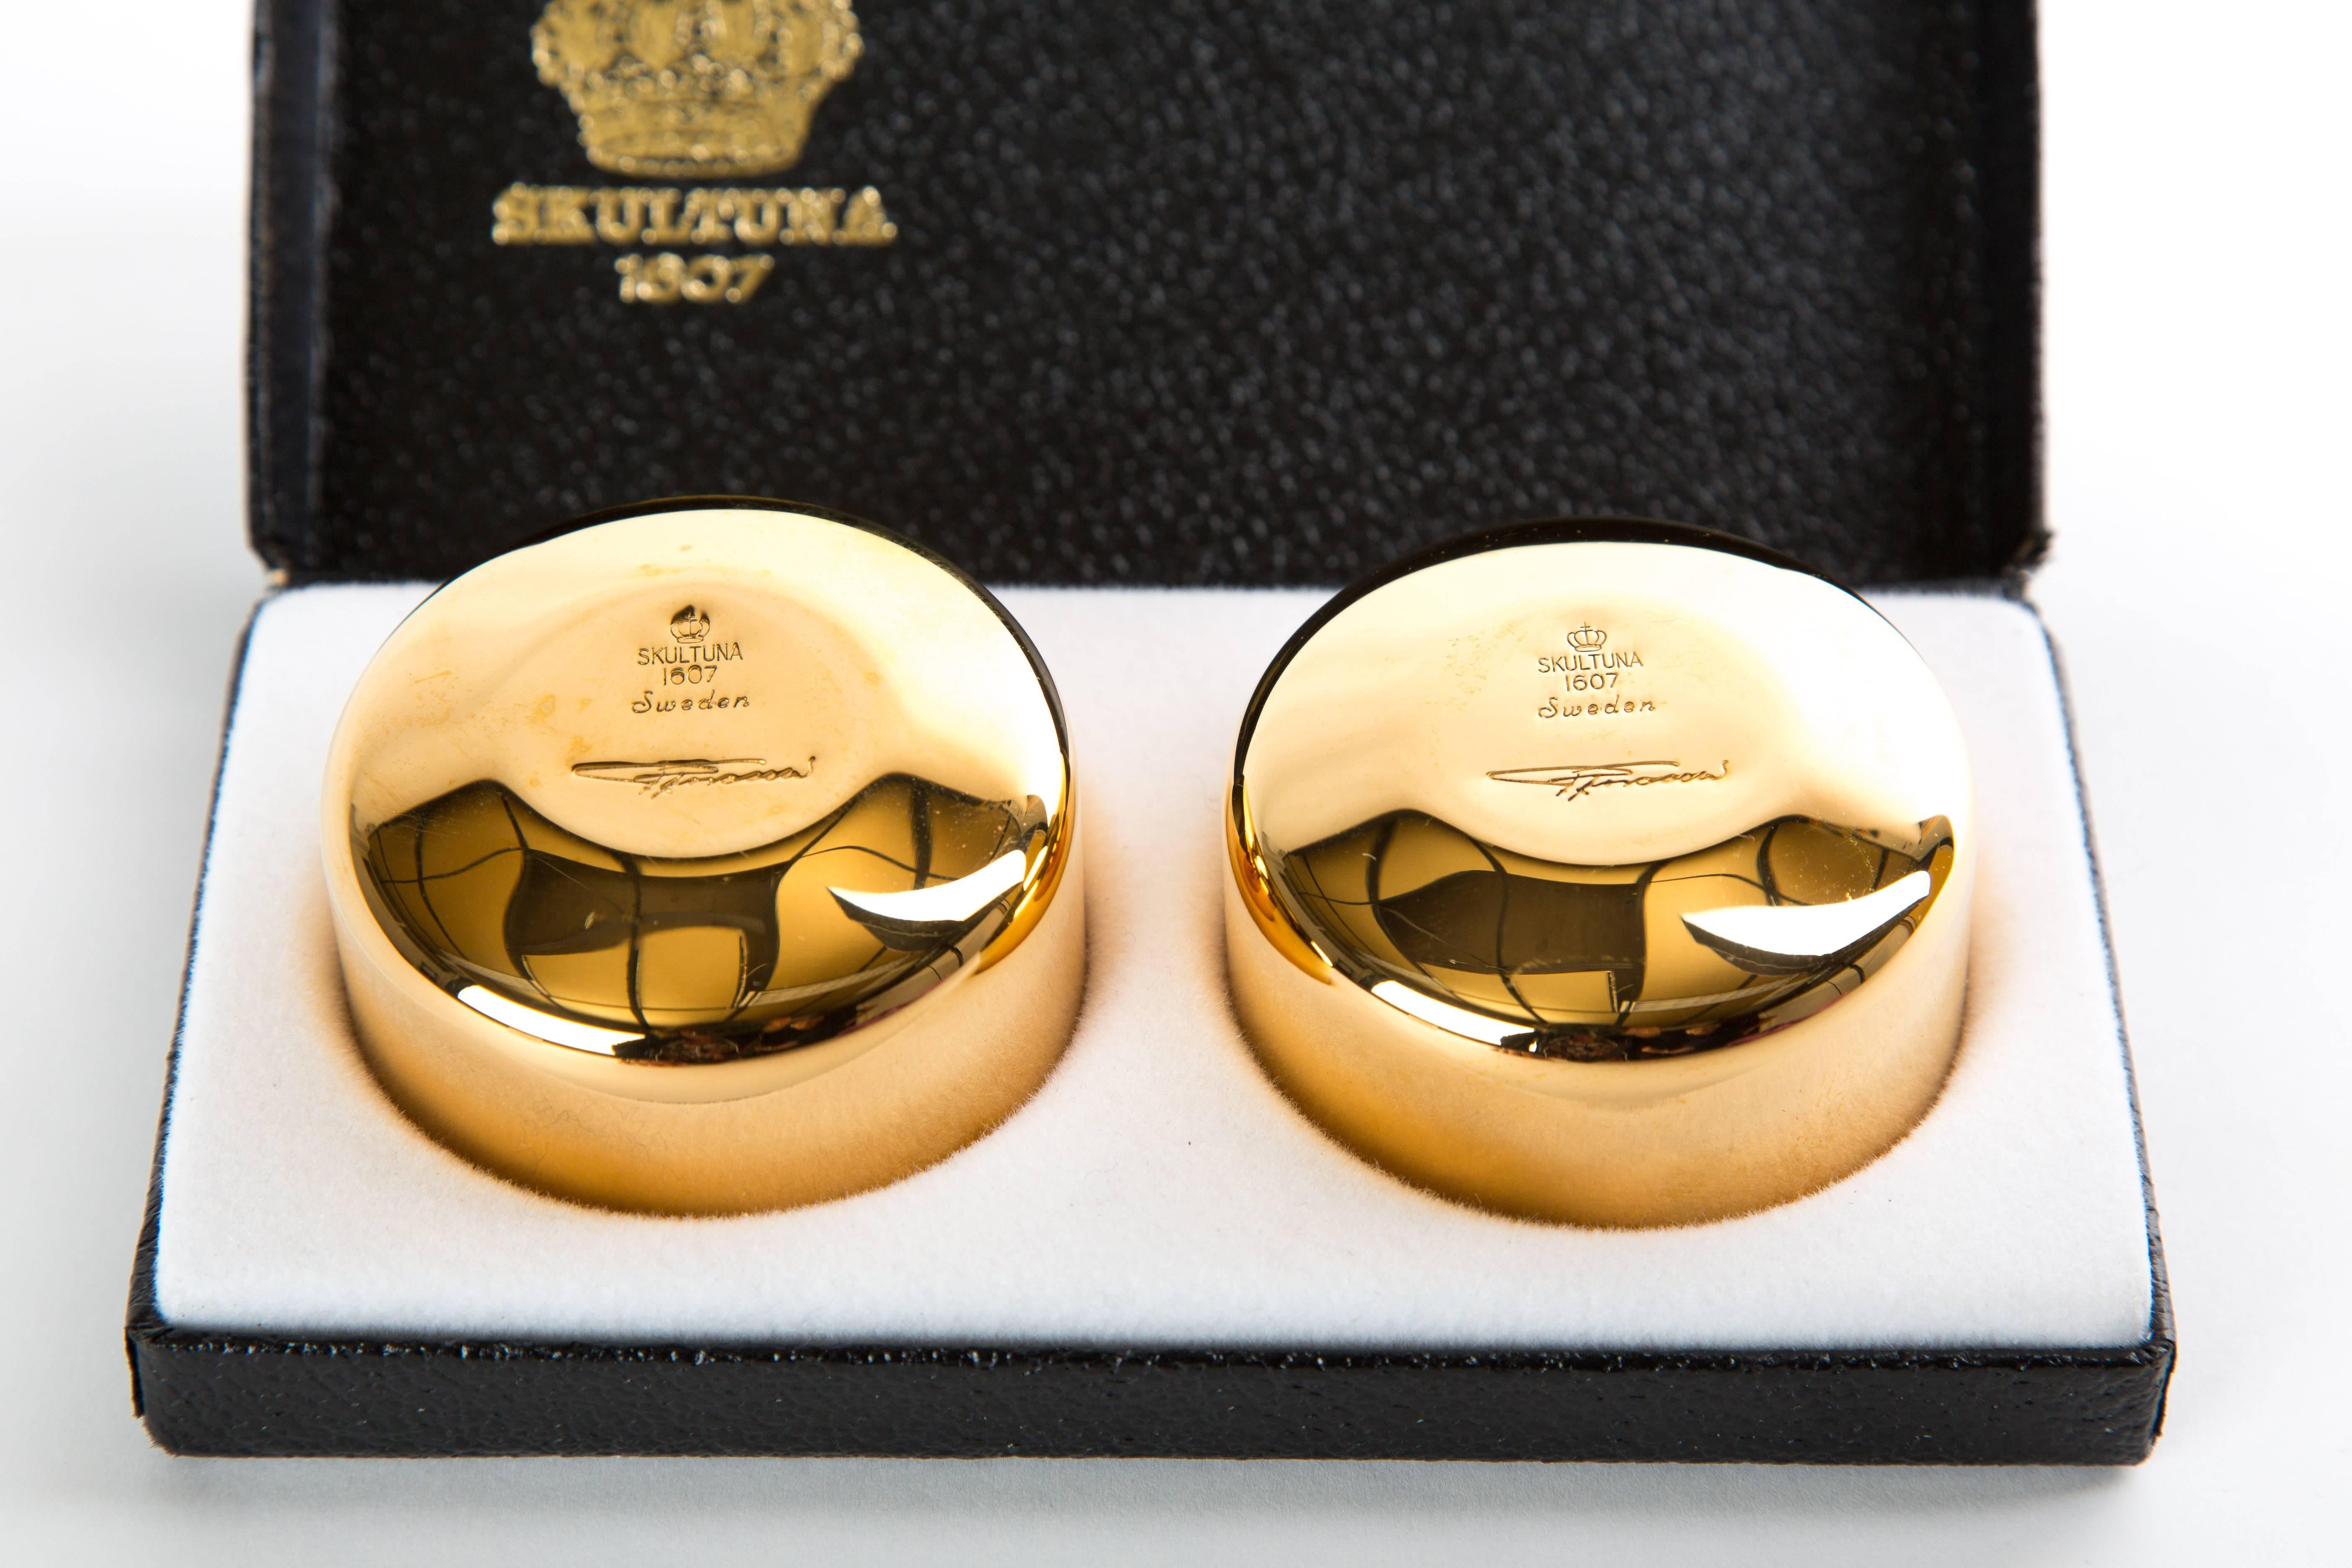 GOLD-PLATED DRINK CUPS. Two gold-plated cups. Designed by Pierre Forssell. In the original box.